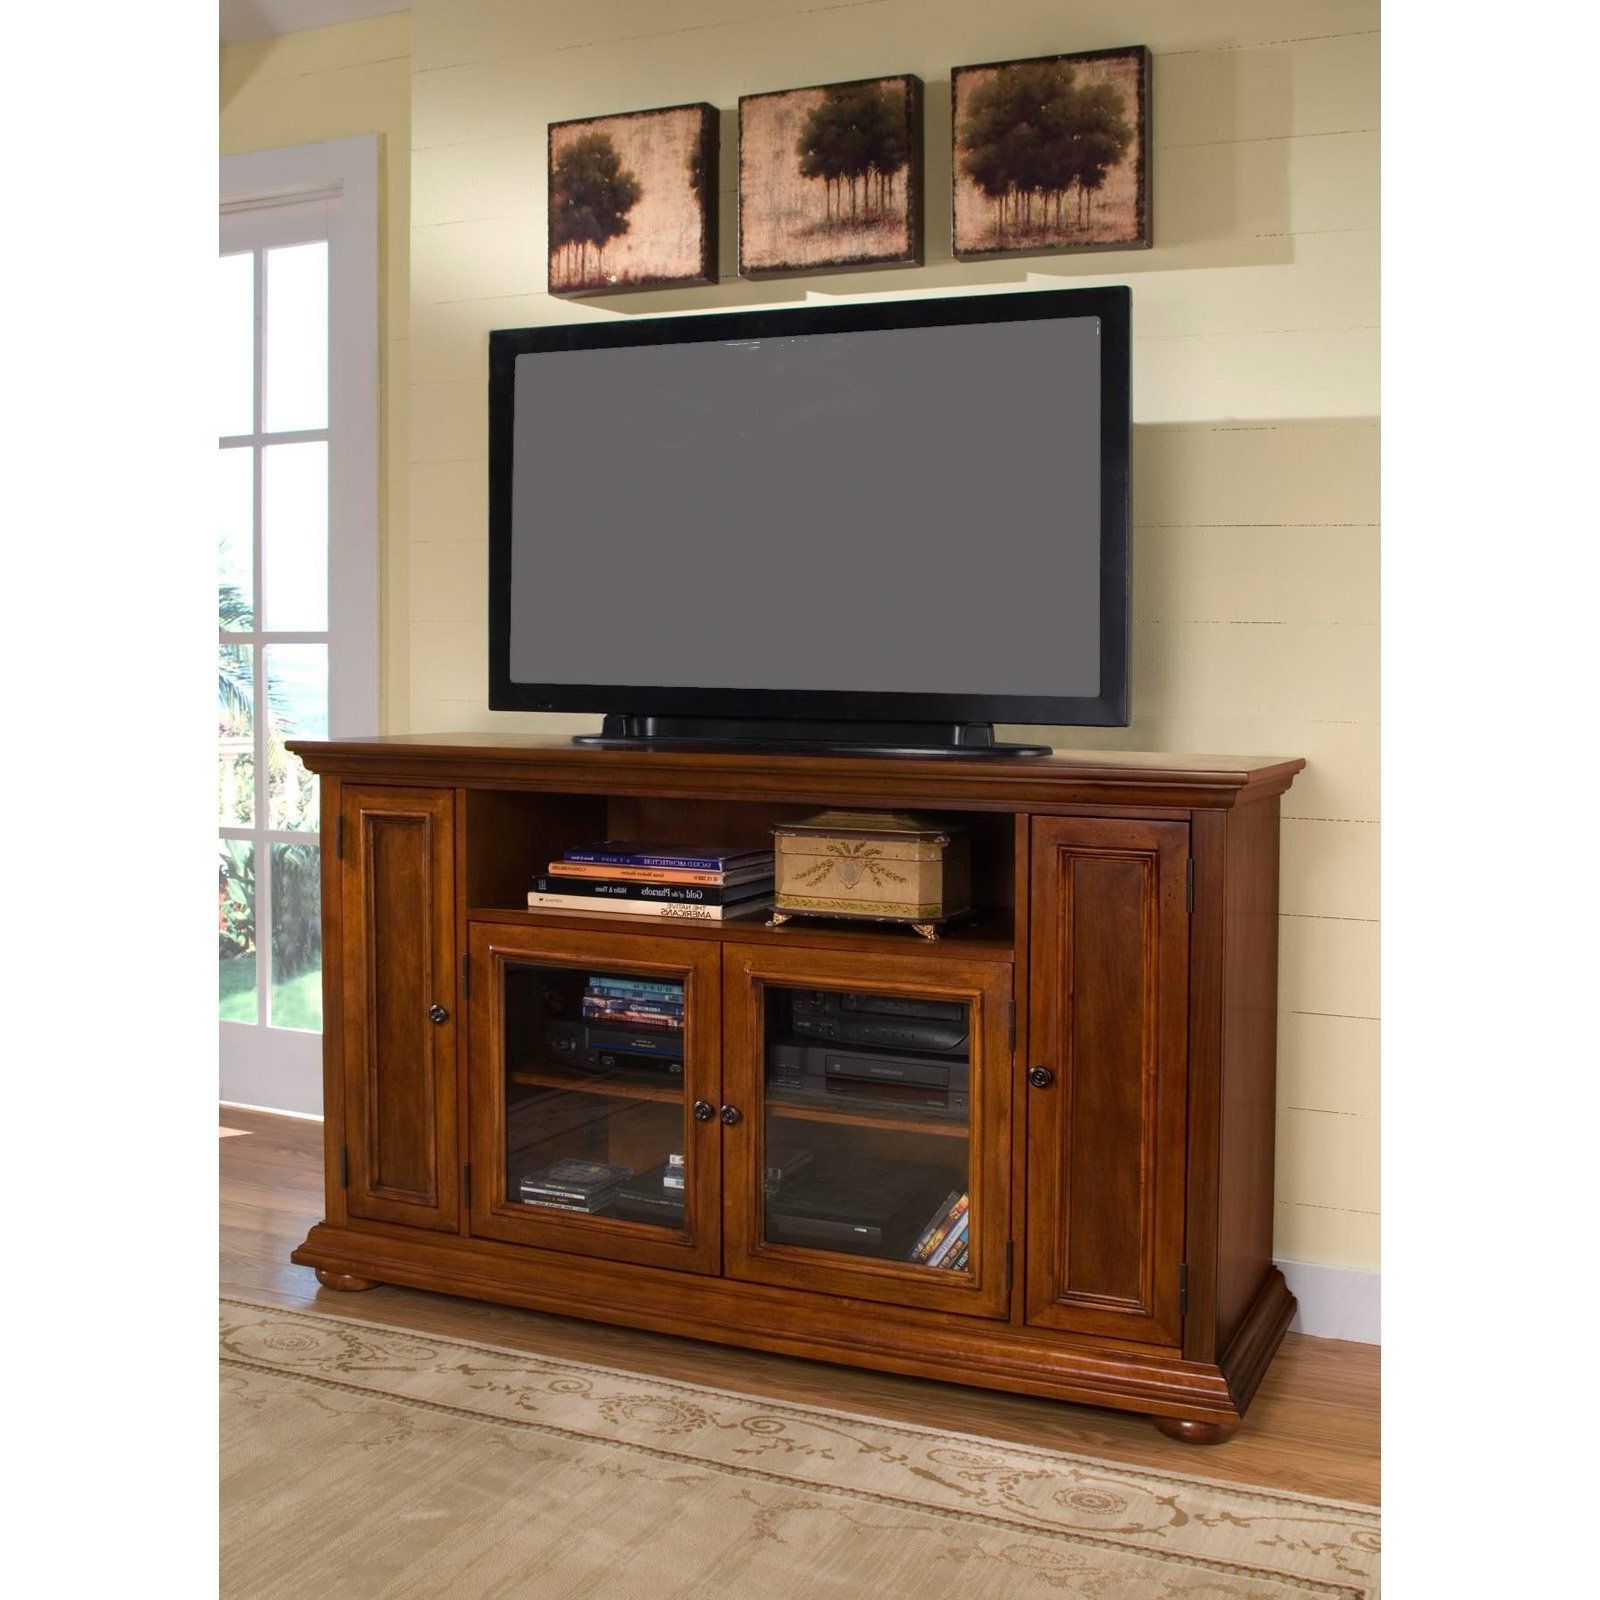 Most Up To Date Oak Tv Cabinets For Flat Screens With Doors For Corner Oak Tv Cabinets For Flat Screens With Doors (View 1 of 20)